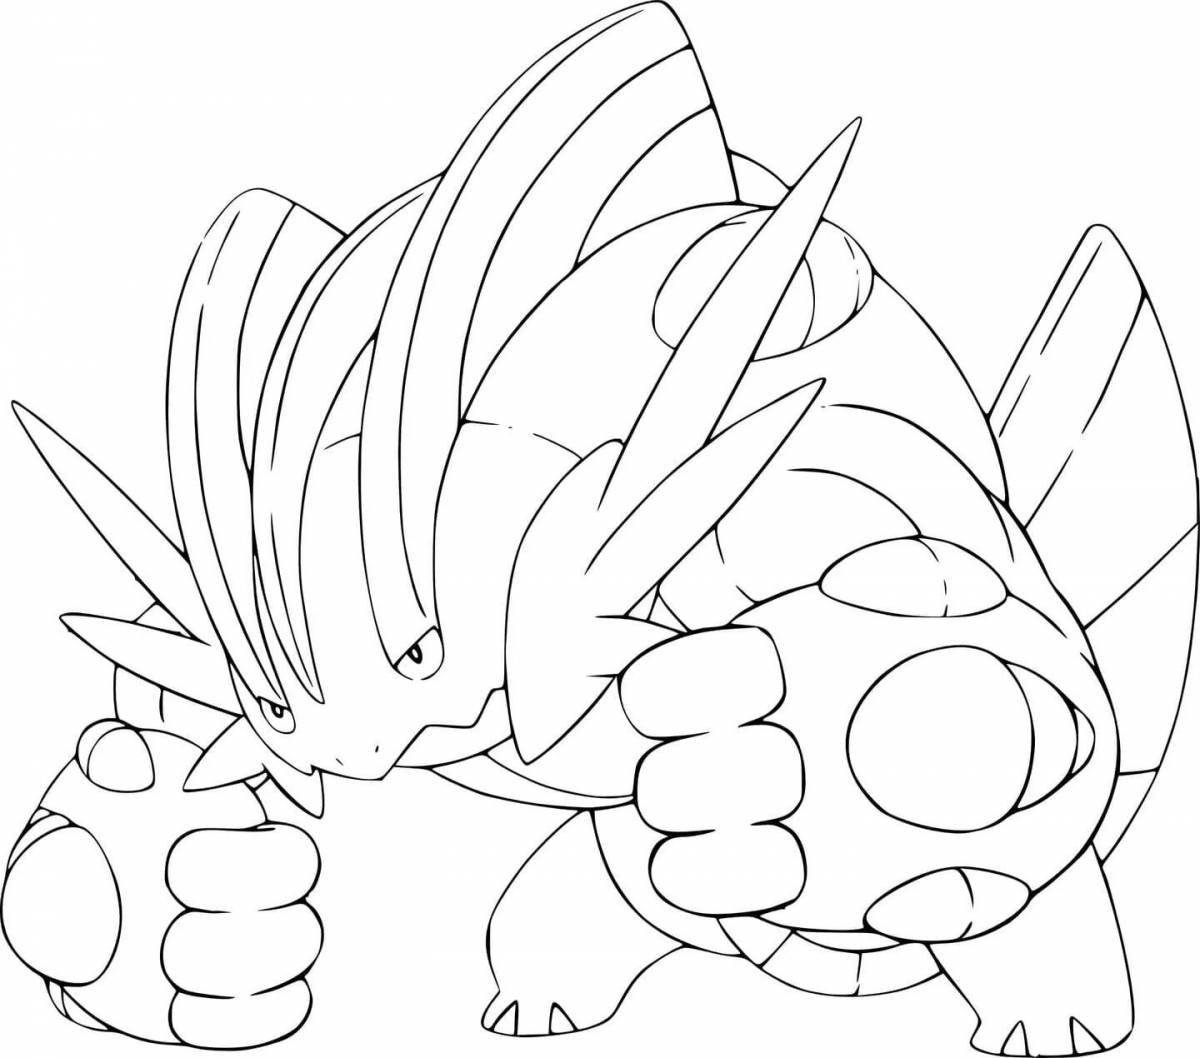 Good quality glowing pokemon coloring book